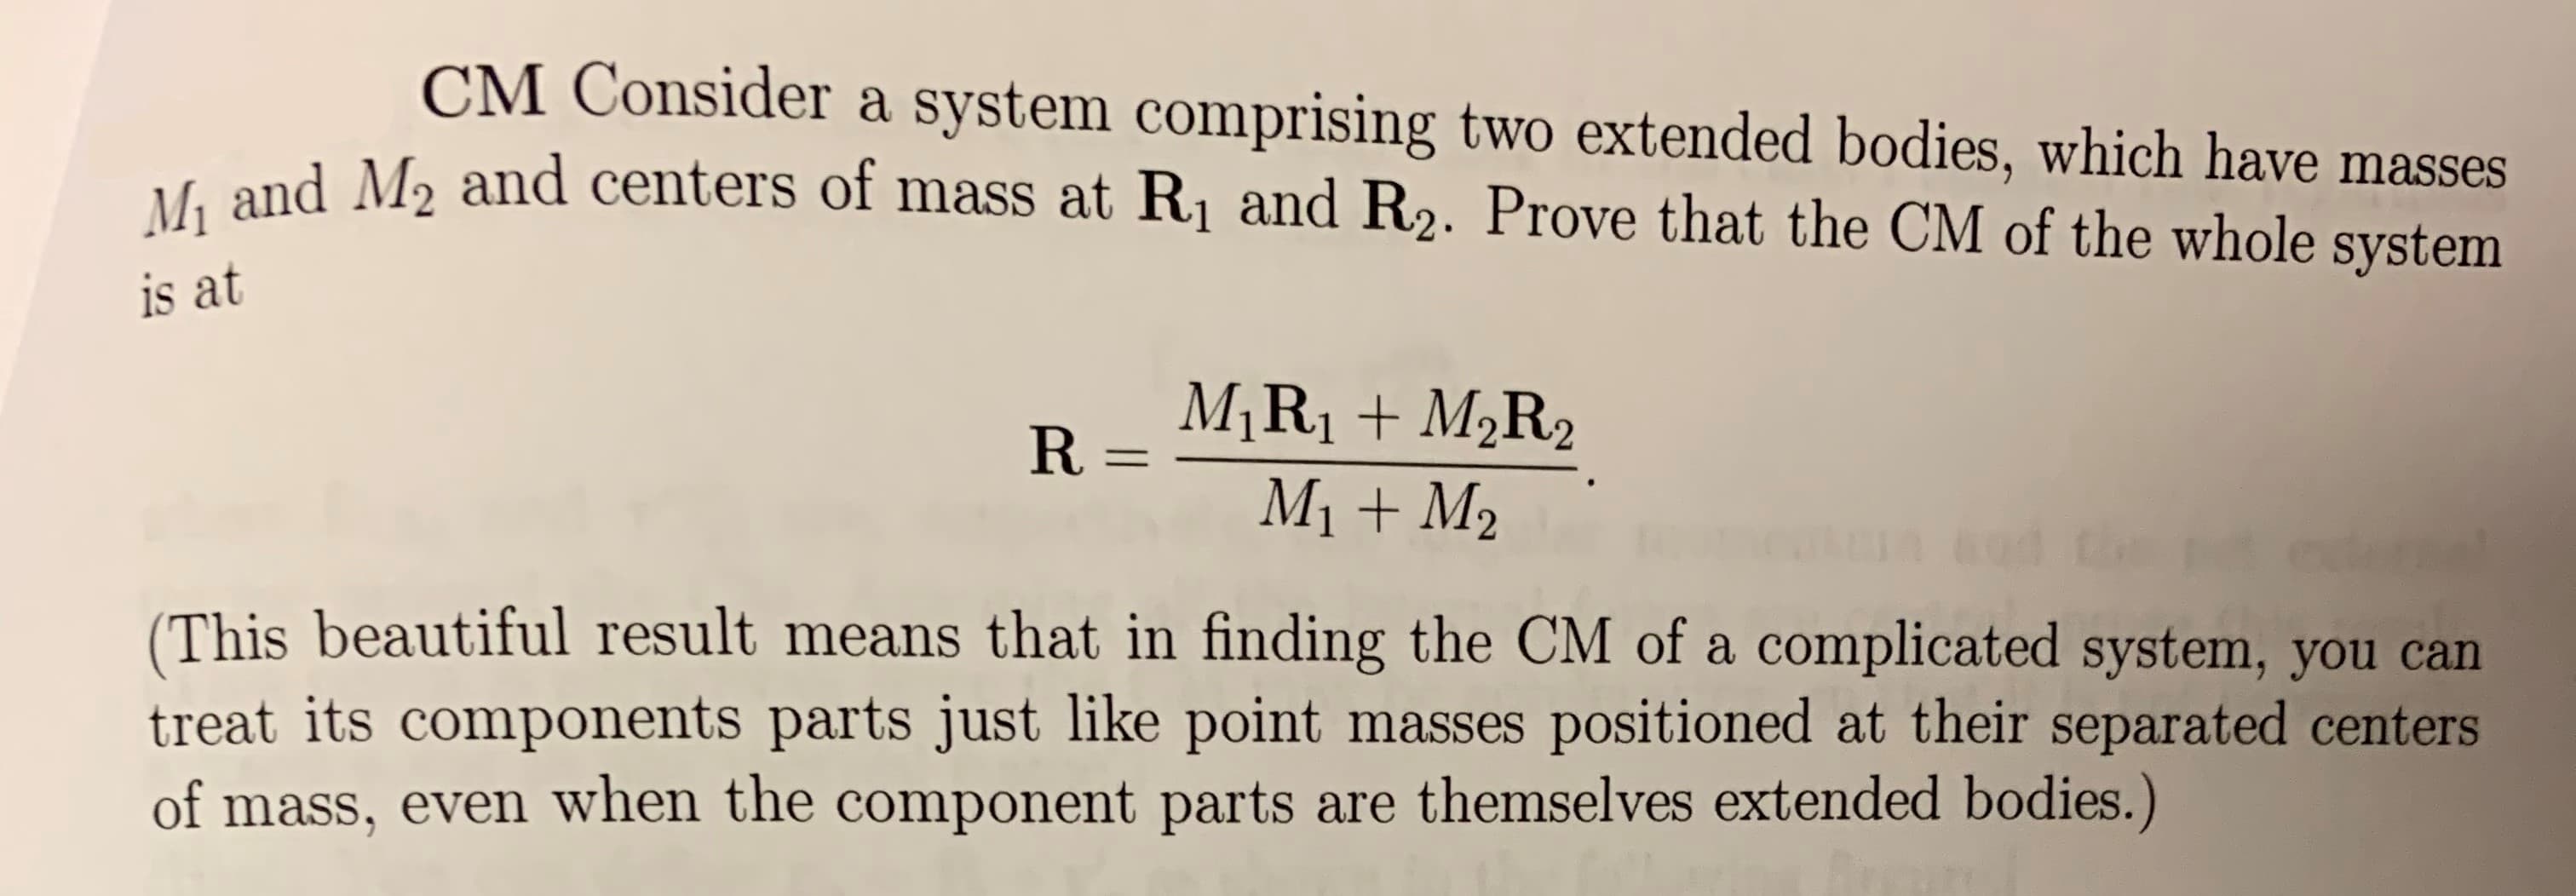 CM Consider a system comprising two extended bodies, which have masses
M1 and M2 and centers of mass at R1 and R2. Prove that the CM of the whole system
is at
R-MIRI+M2R2
M1M2
(This beautiful result means that in finding the CM of a complicated system, you can
treat its components parts just like point masses positioned at their separated centers
of mass, even when the component parts are themselves extended bodies.)
